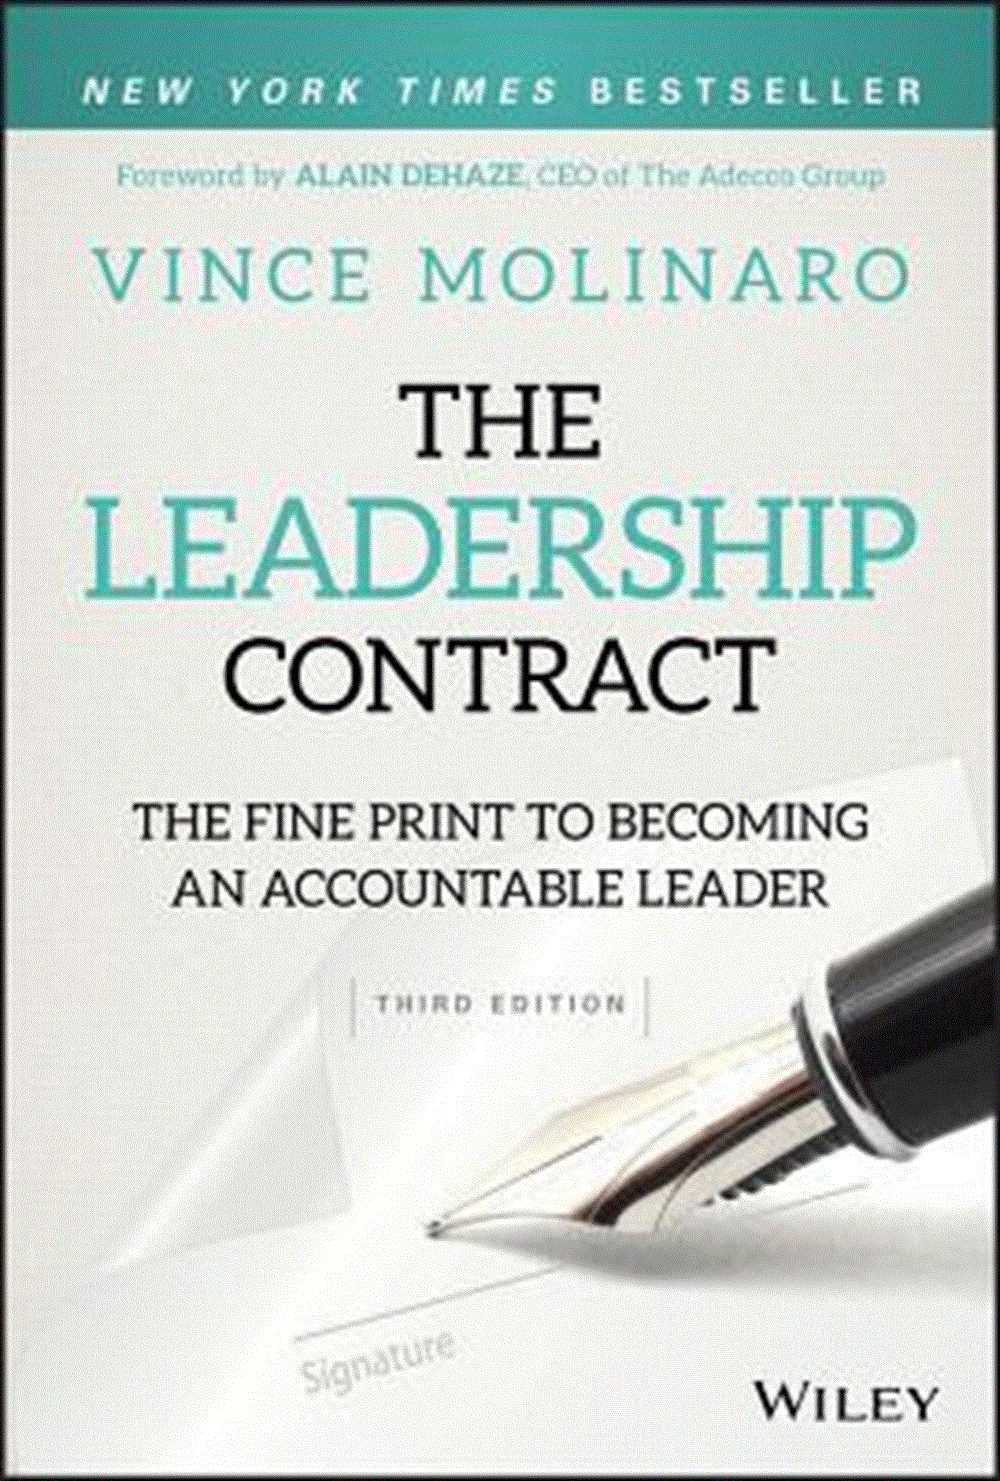 Leadership Contract The Fine Print to Becoming an Accountable Leader